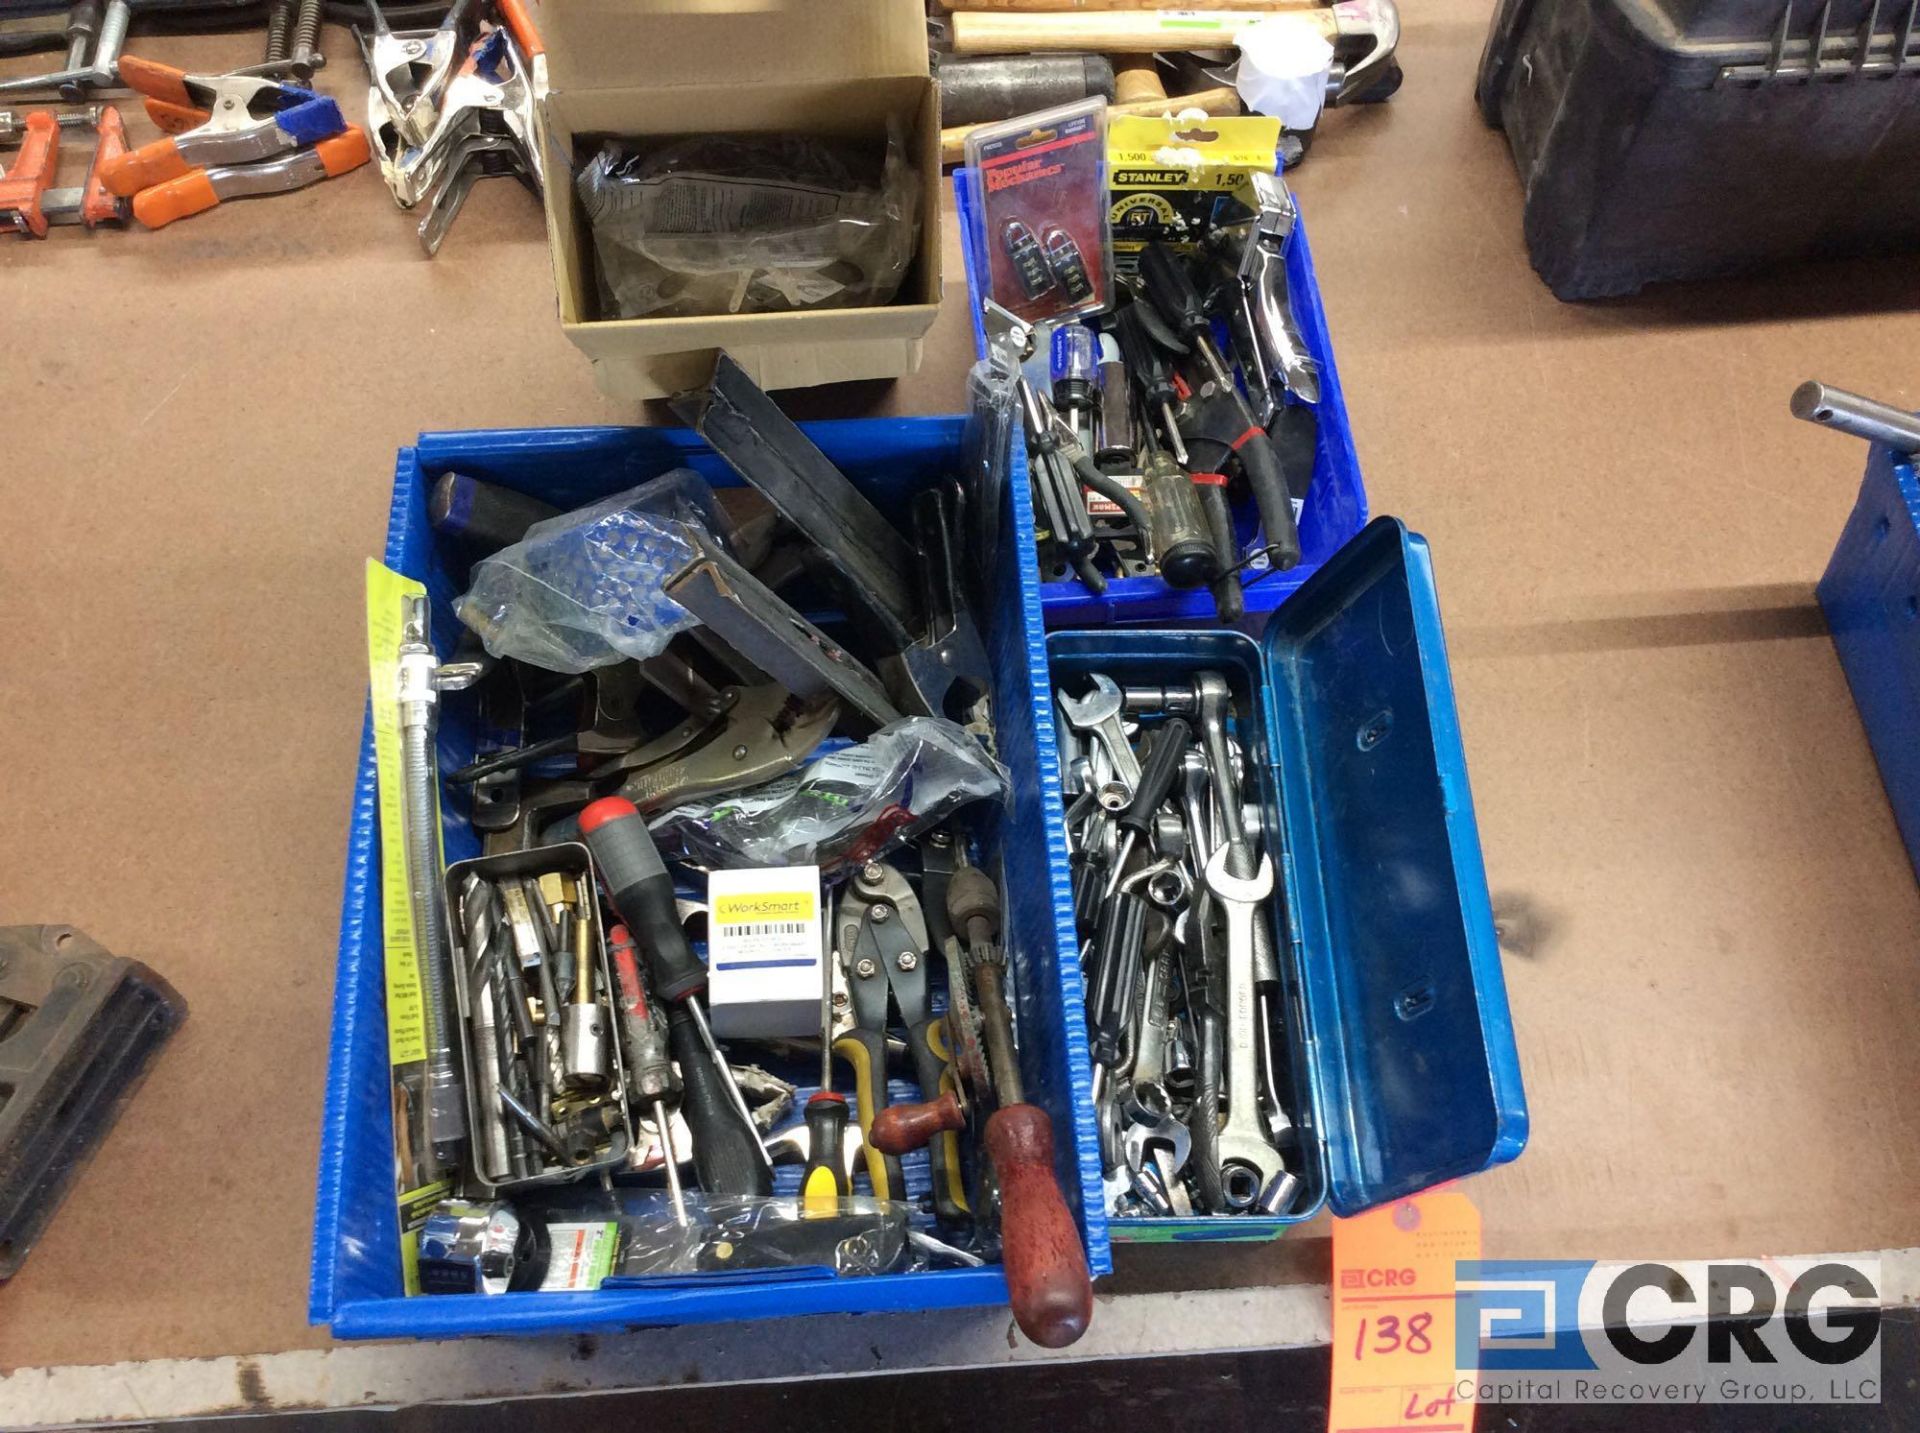 Lot of assorted tooling, drills, screwdrivers, clamps, safety glasses, pliers, sockets, - Image 2 of 2